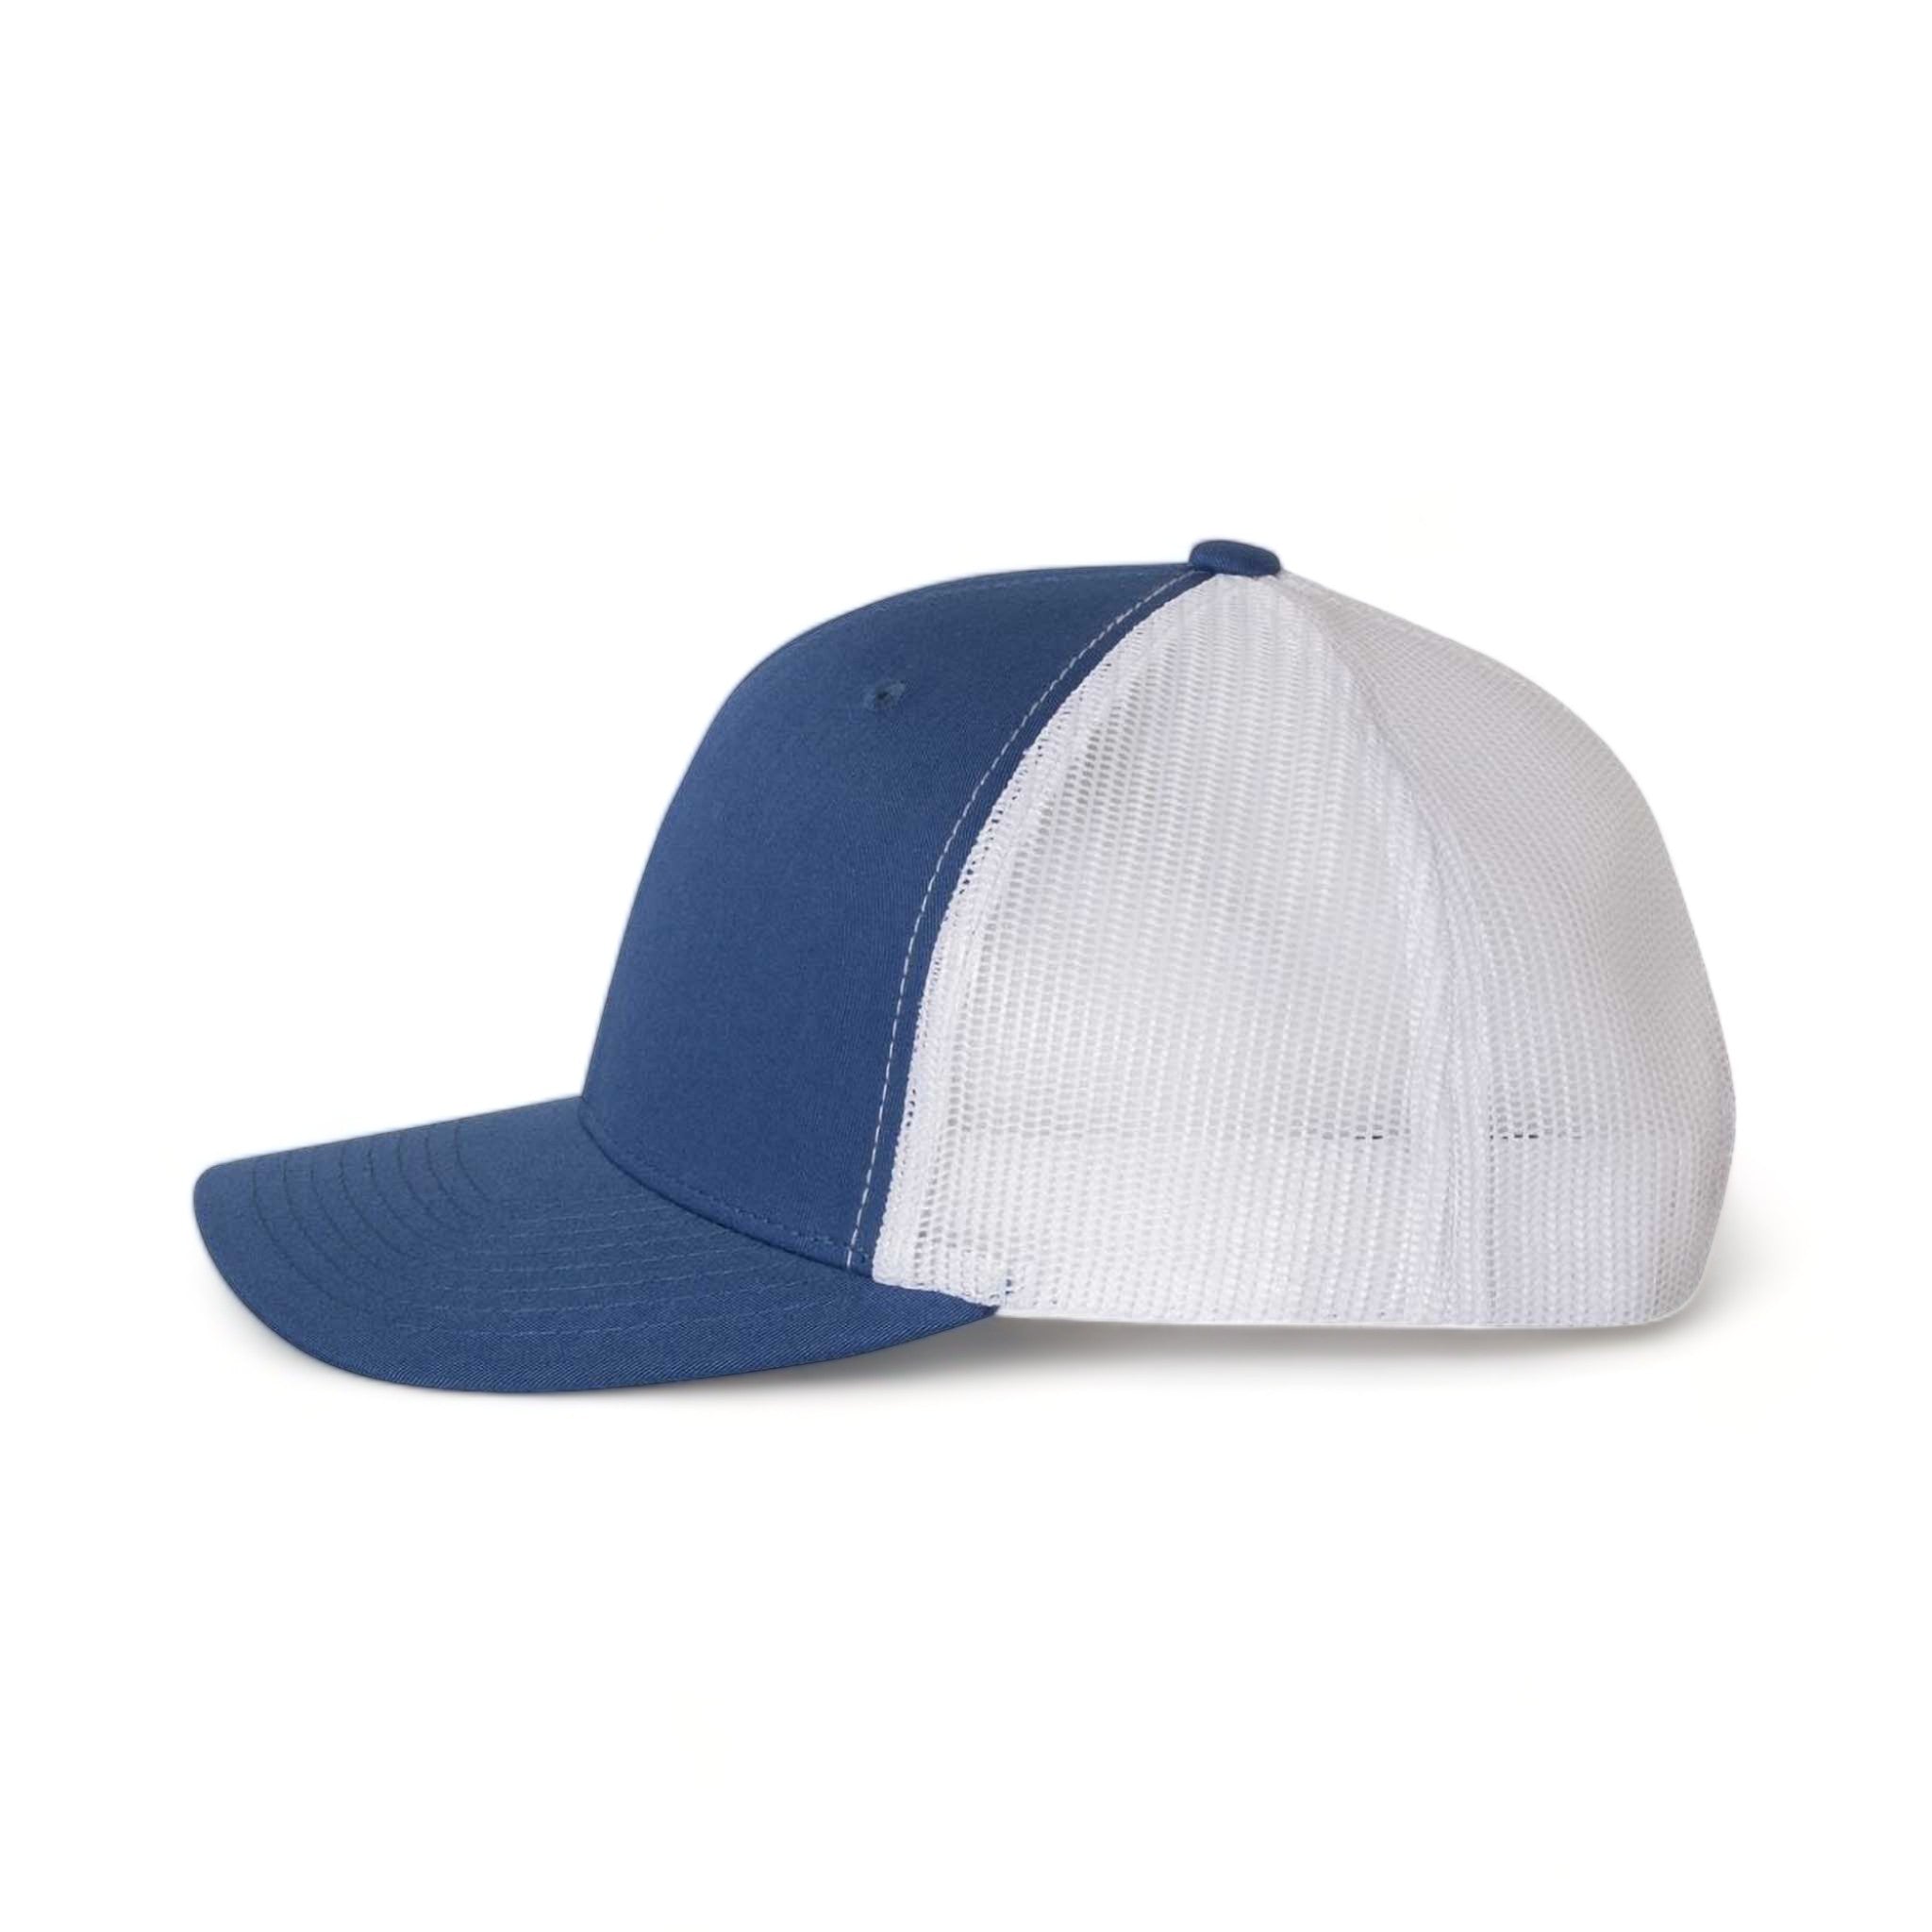 Side view of YP Classics 6606 custom hat in royal and white